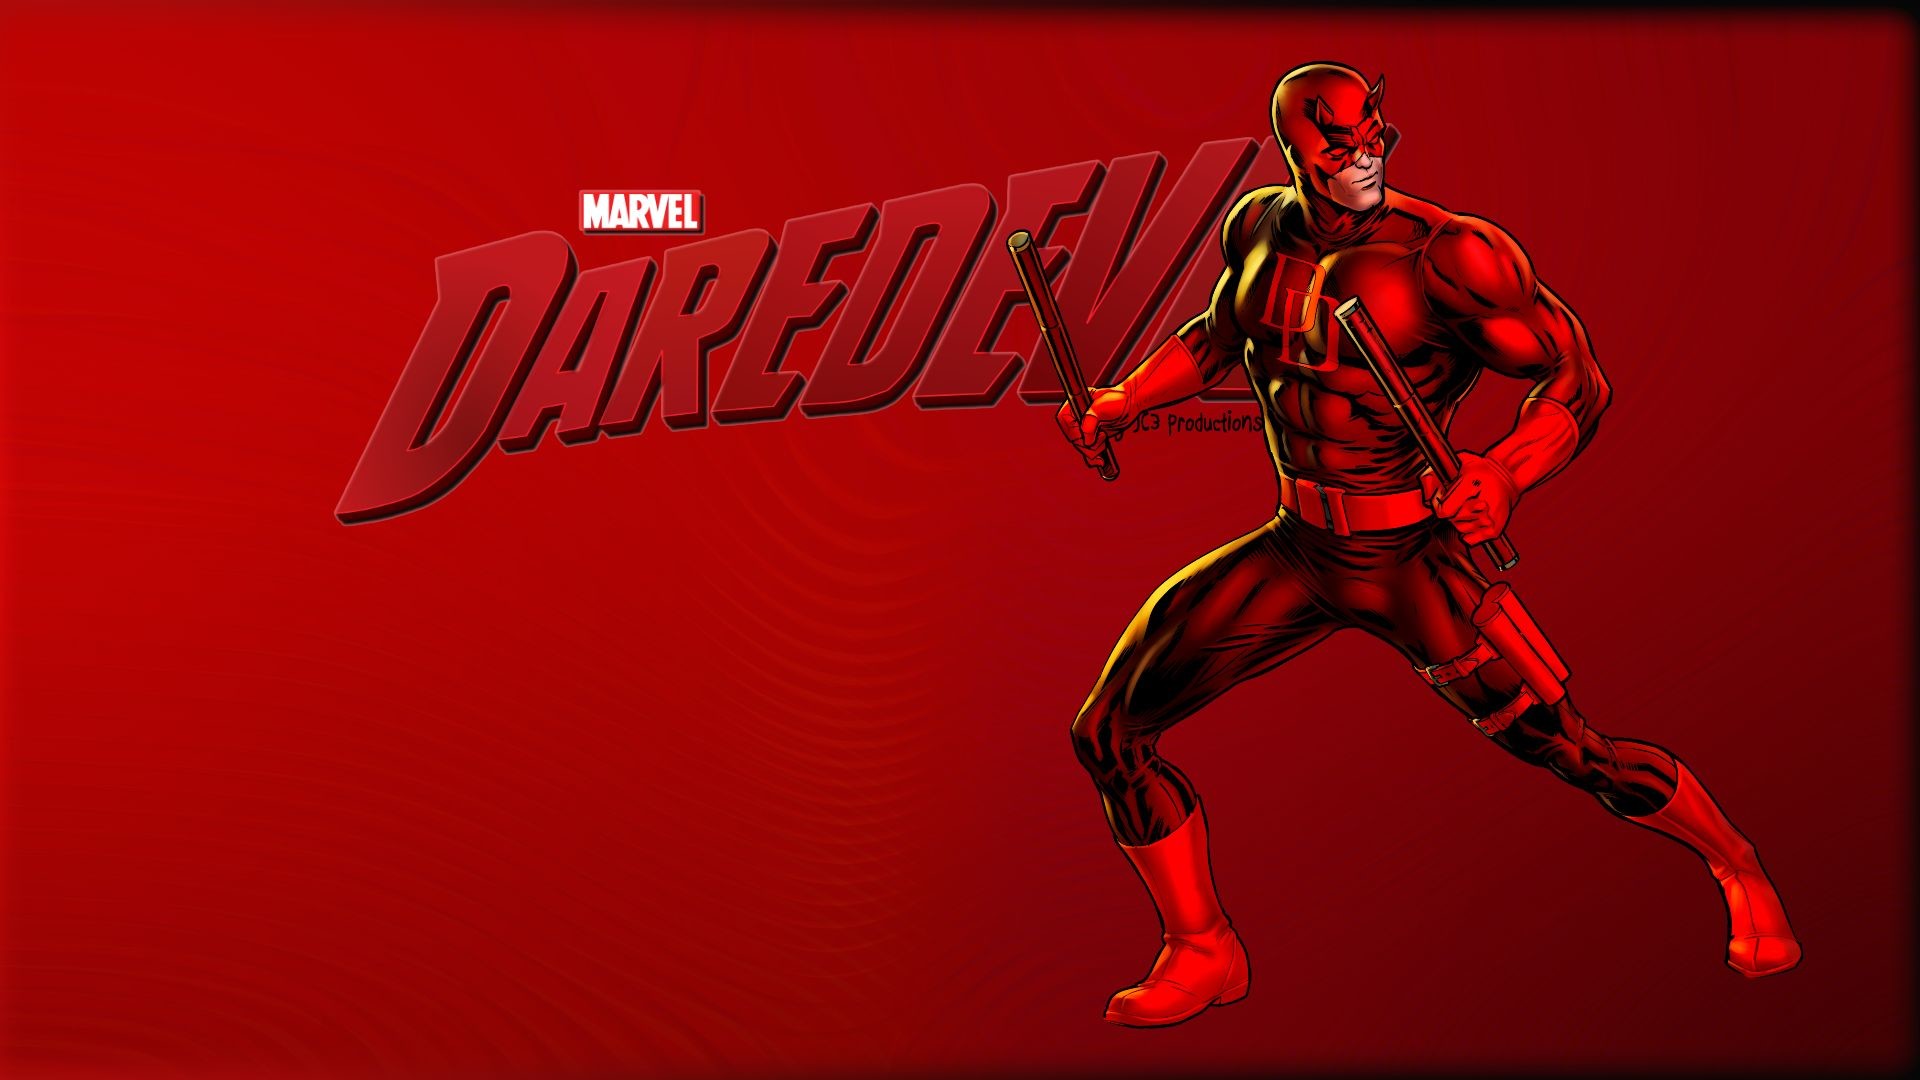 1920x1080 Daredevil images Daredevil 2a HD wallpaper and background photos